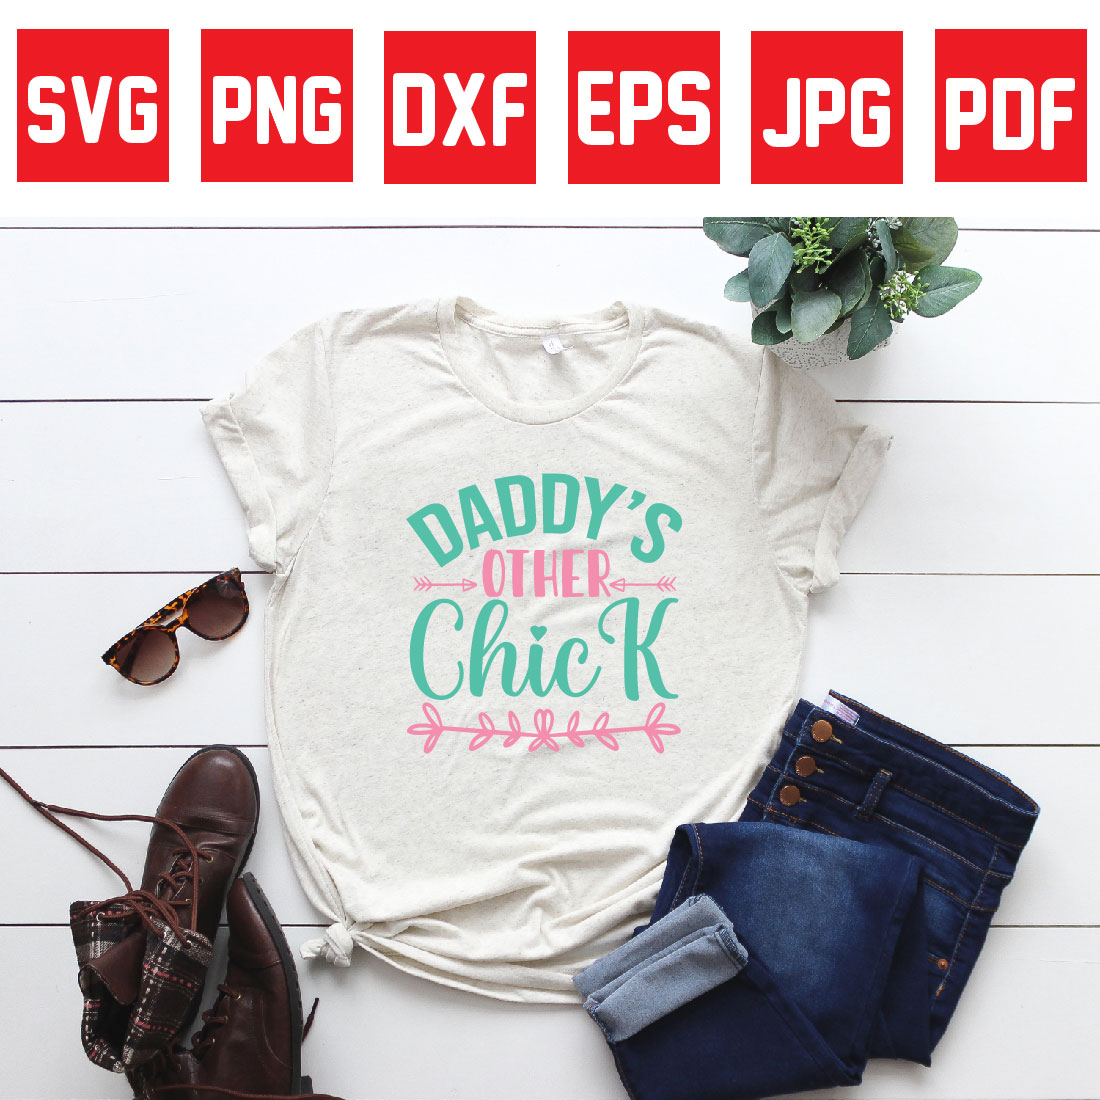 daddy’s other chick preview image.